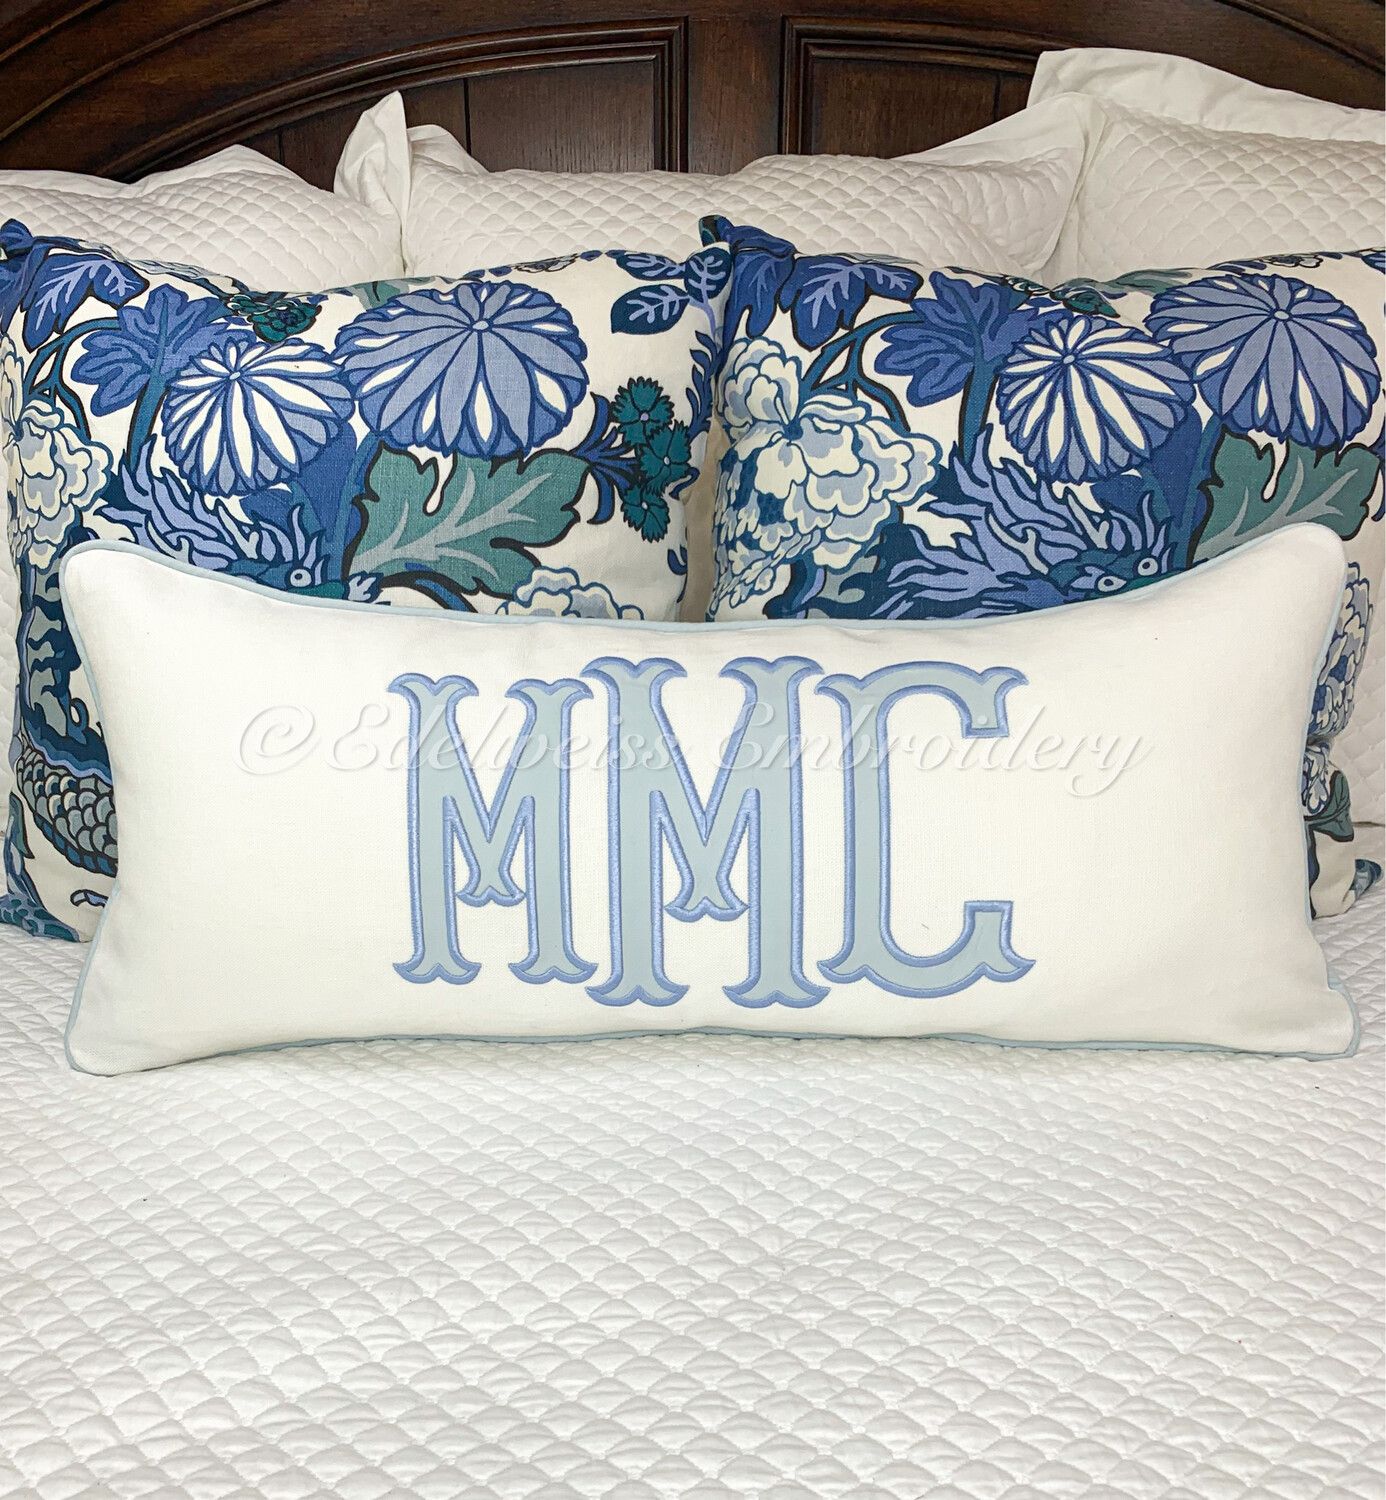 Appliqué Monogram Lumbar, Available In Linen, Pique , Or Schumacher White Blake Polished Cotton | Edelweiss Embroidery